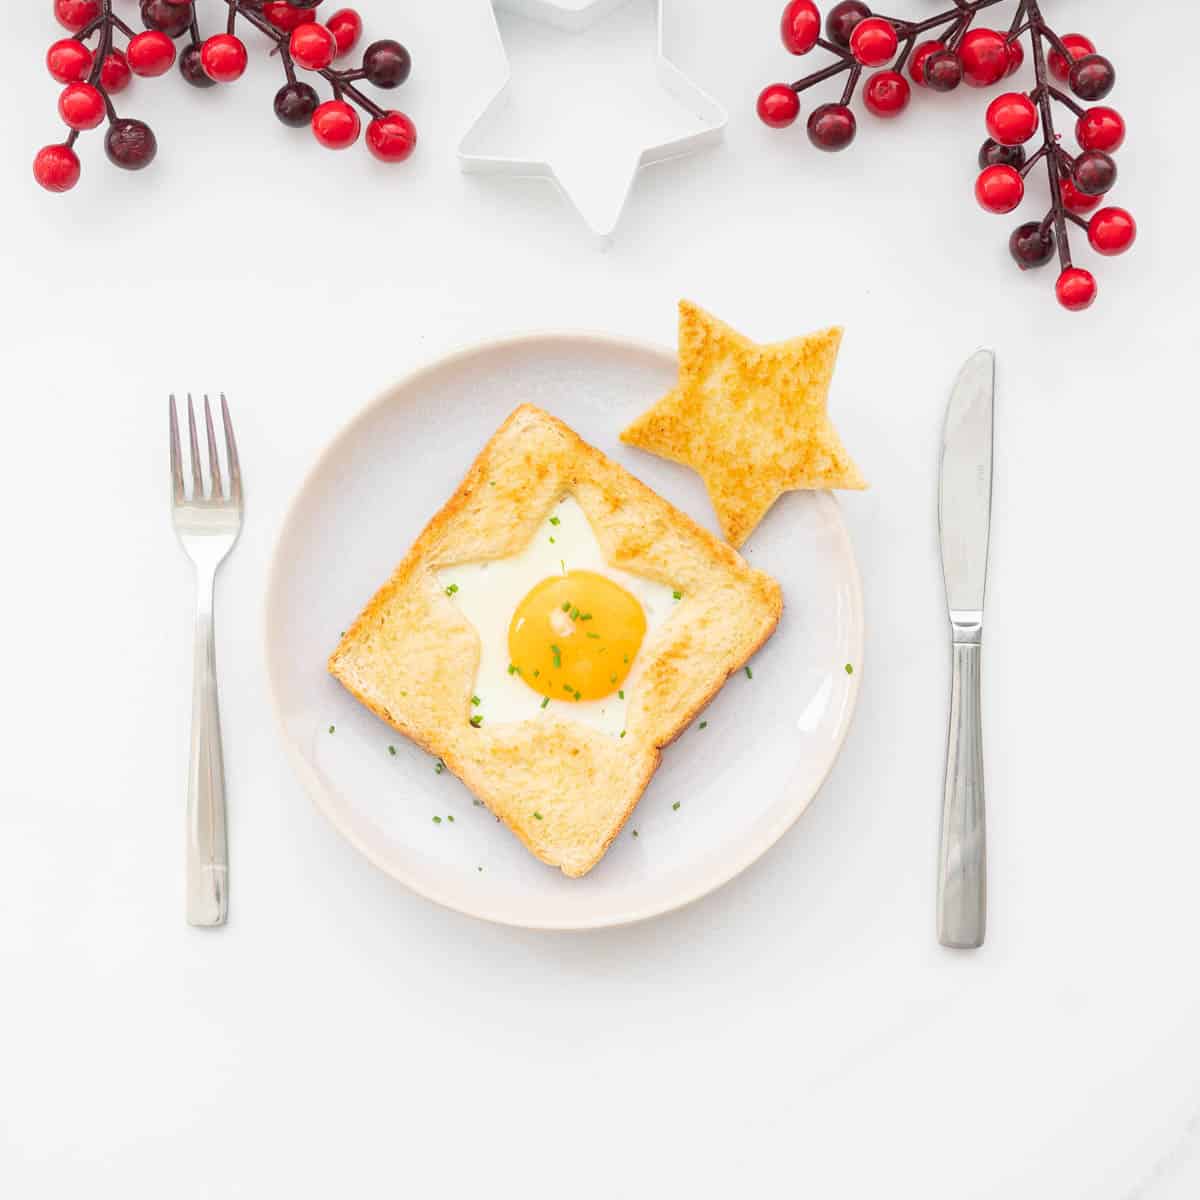 An egg cooked into the star shaped hole of a piece of toast on a plate with a golden star piece of toast to the side, red Christmas decoration around the plate.